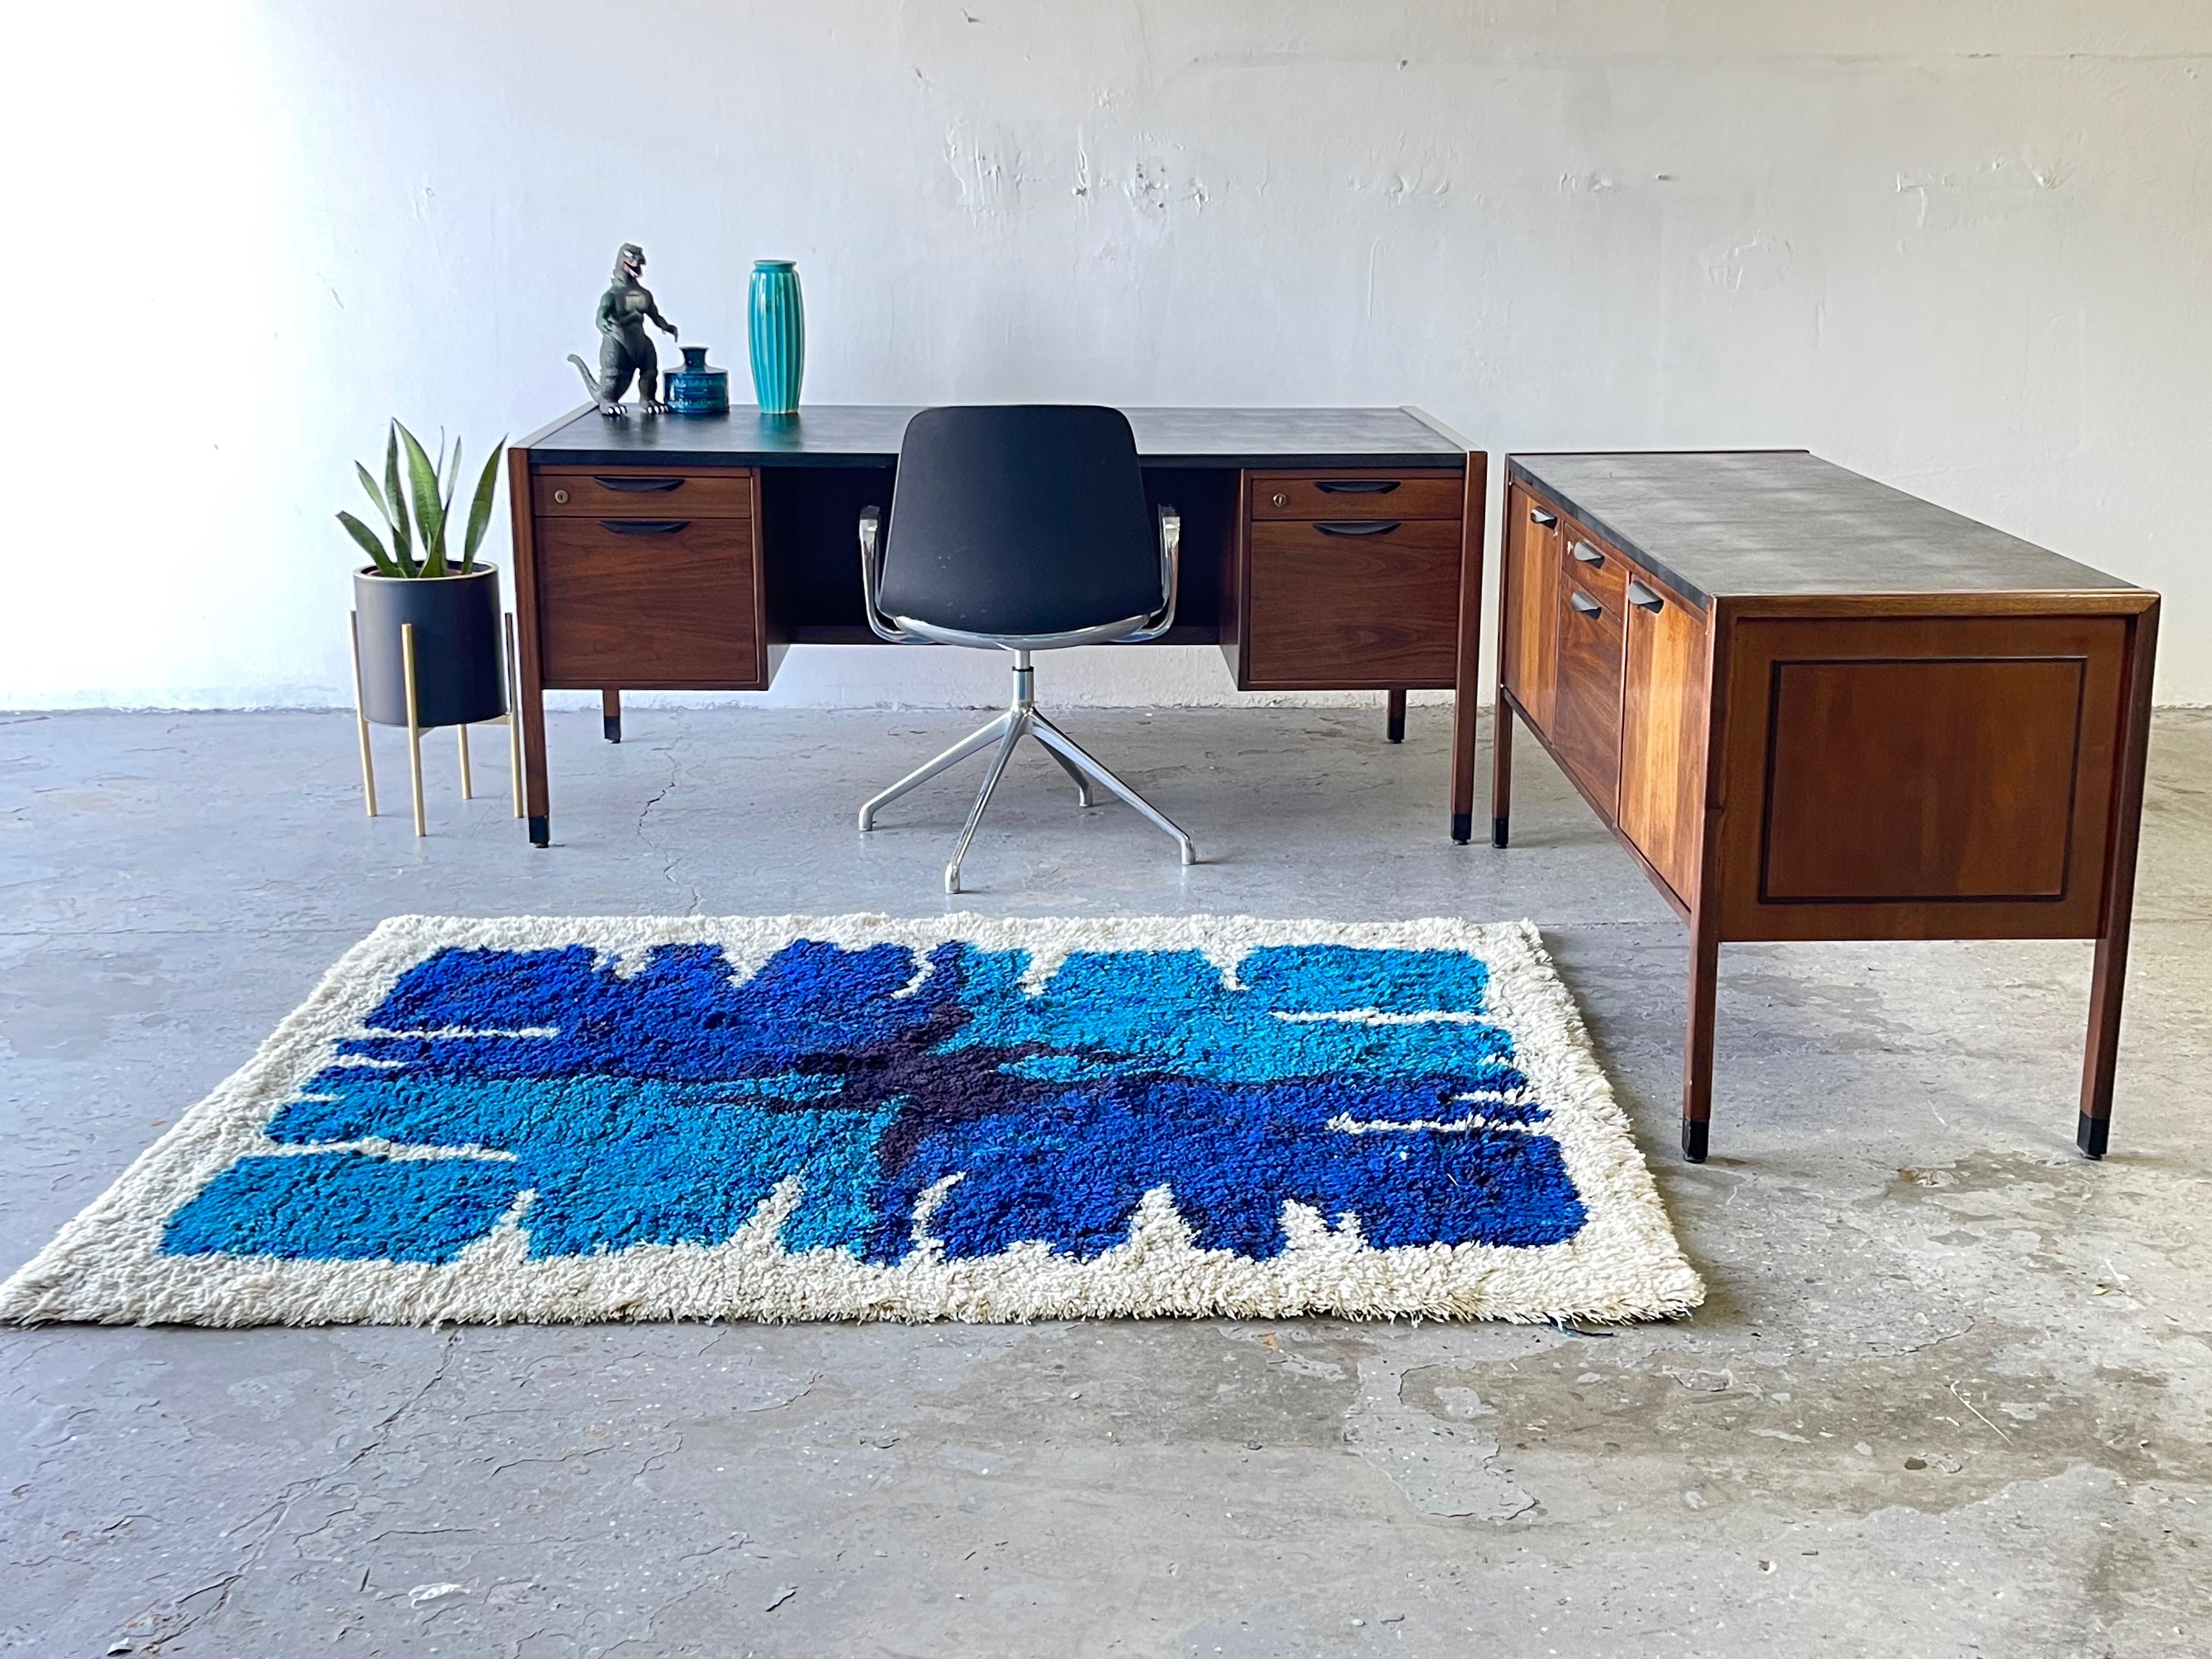 Large Executive walnut desk & credenza by Jens Risom for Jens Risom Design Inc. in Walnut with a Vinyl Top, c. 1960s

Wonderful Mid-Century Modern walnut credenza by legendary Danish designer Jens Risom. This Matching desk & credenza Is very hard